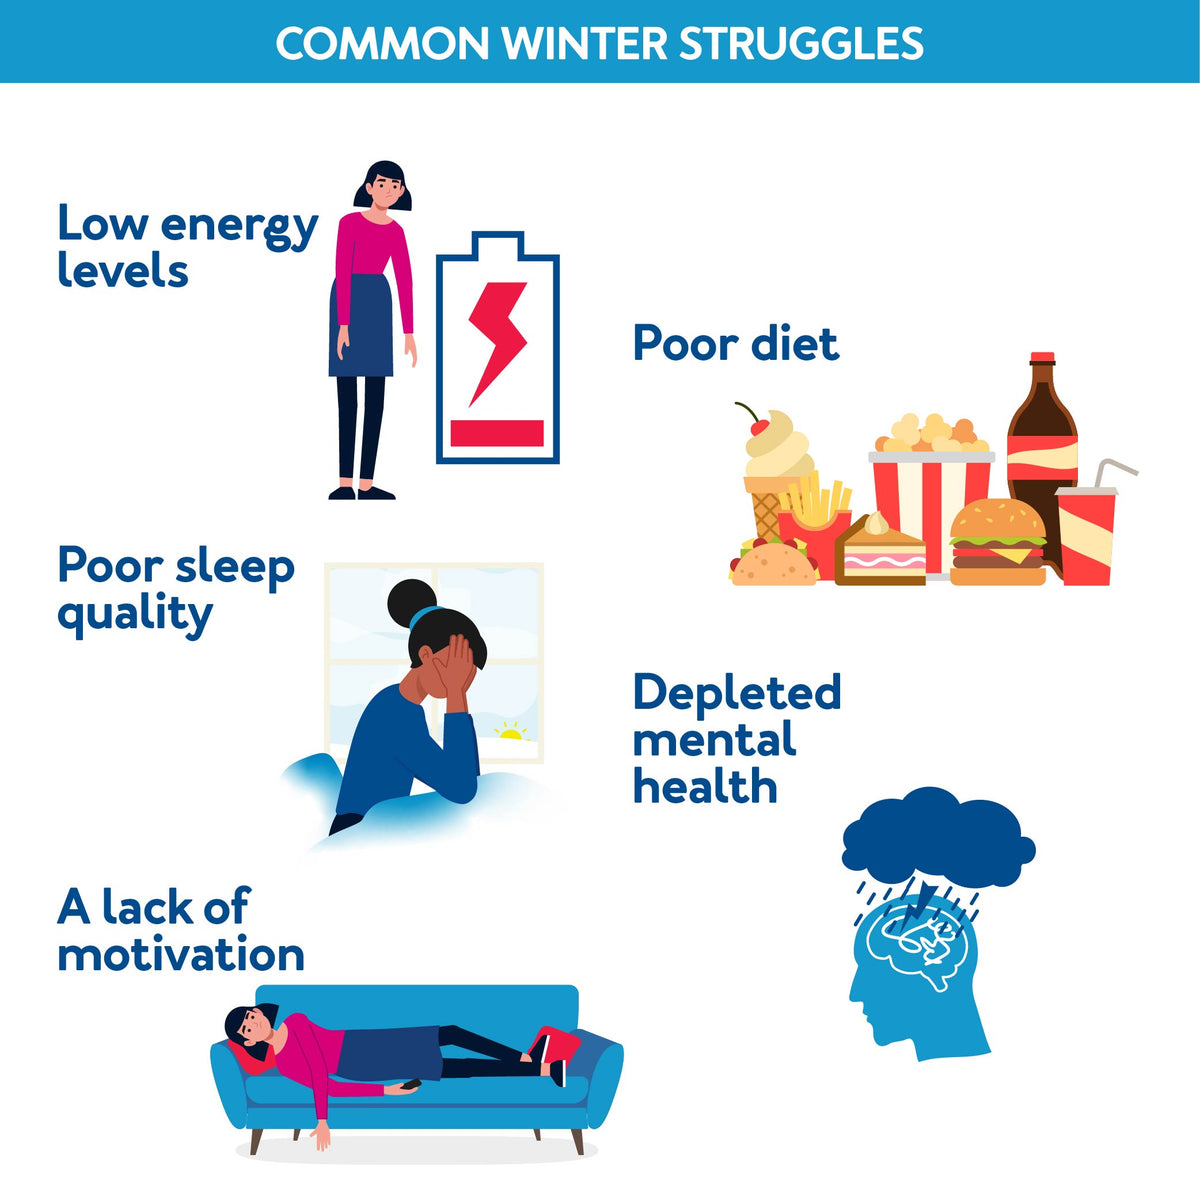 Common Winter Struggles: Low Energy Levels, Poor Sleep Quality, A Lack of Motivation, Poor Diet & Depleted Mental Health